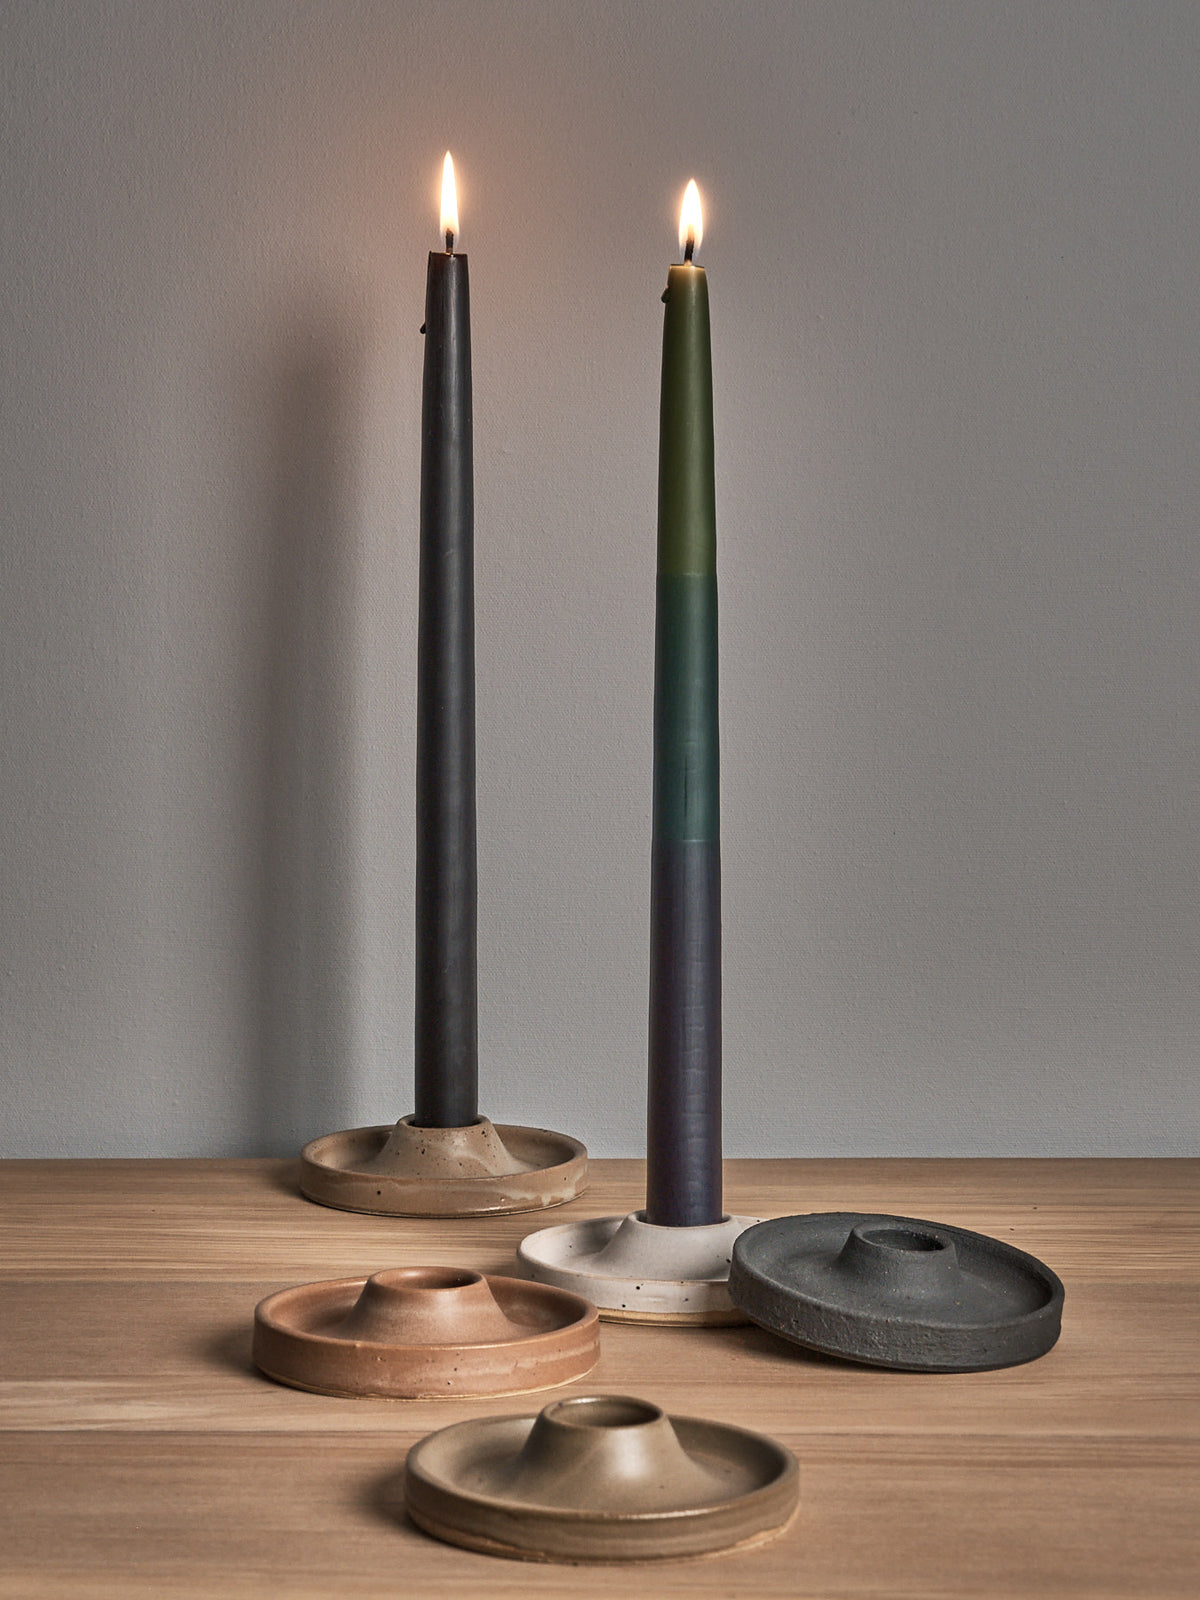 Three Candle Holder – Ochre by deborah sweeney on a wooden table next to each other.